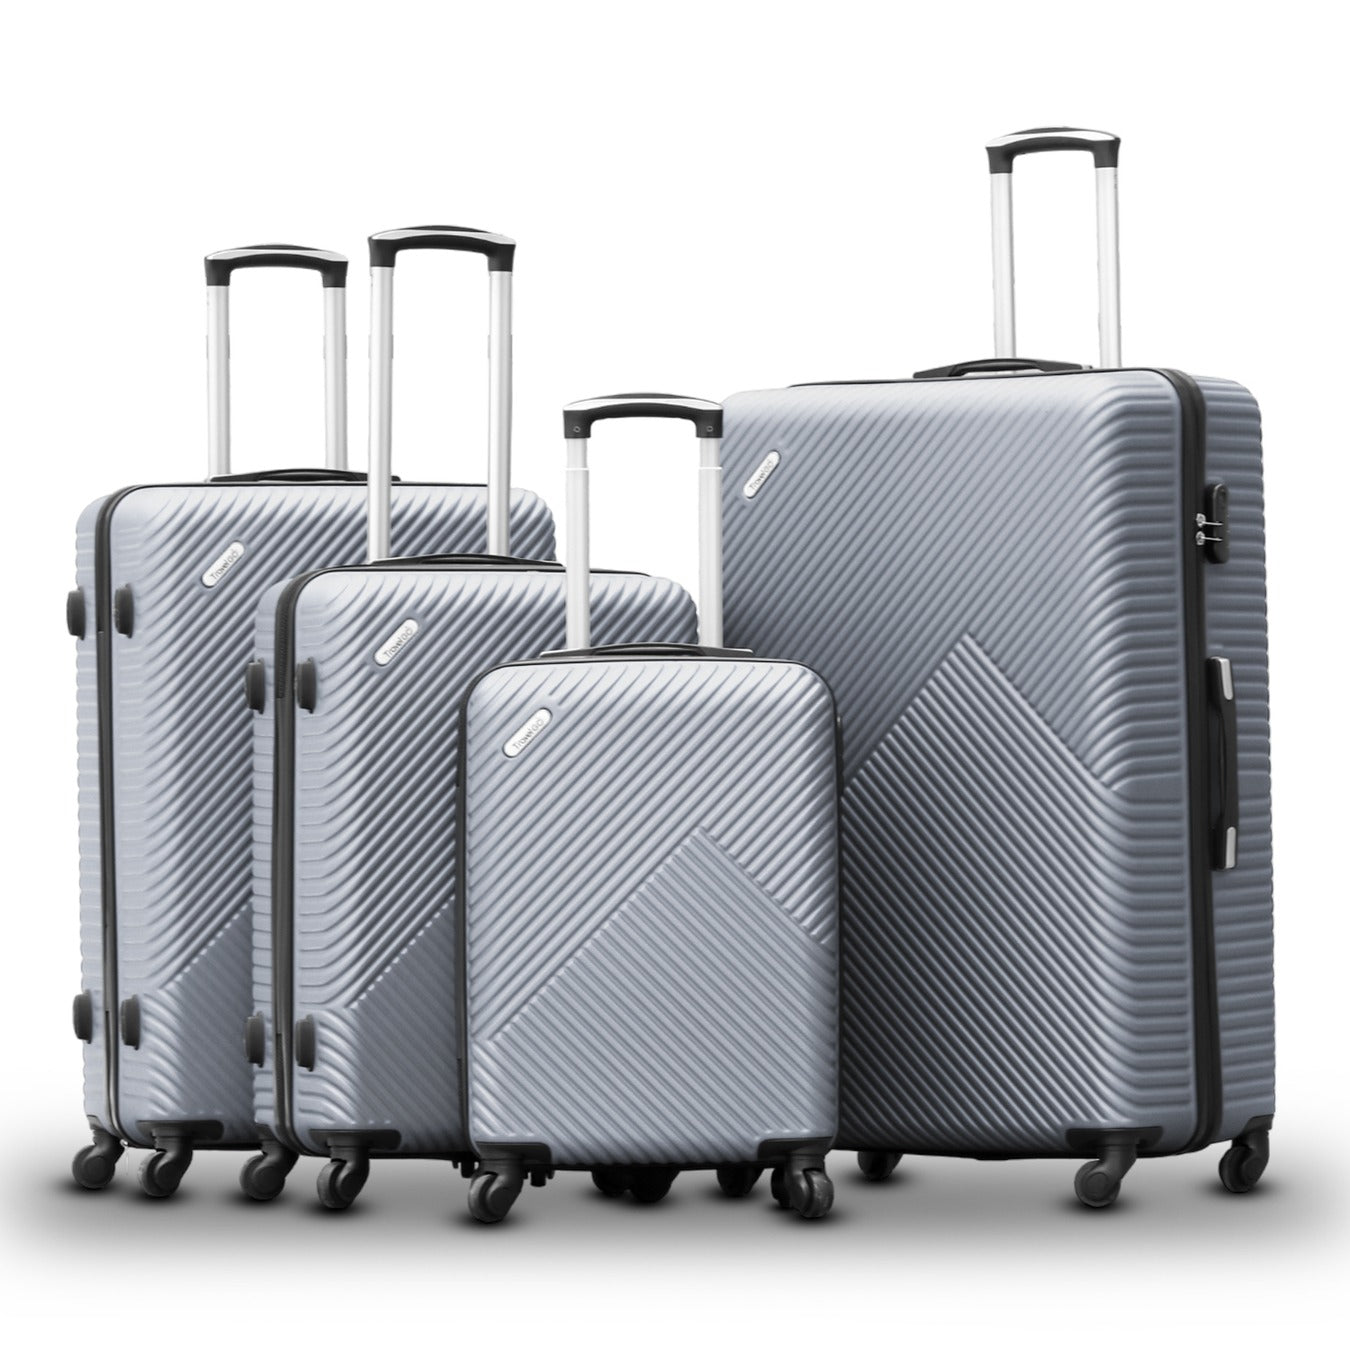 TravelGo Lightweight ABS Luggage Bags with Spinner Wheels | 20, 24, 28, 32 Inches